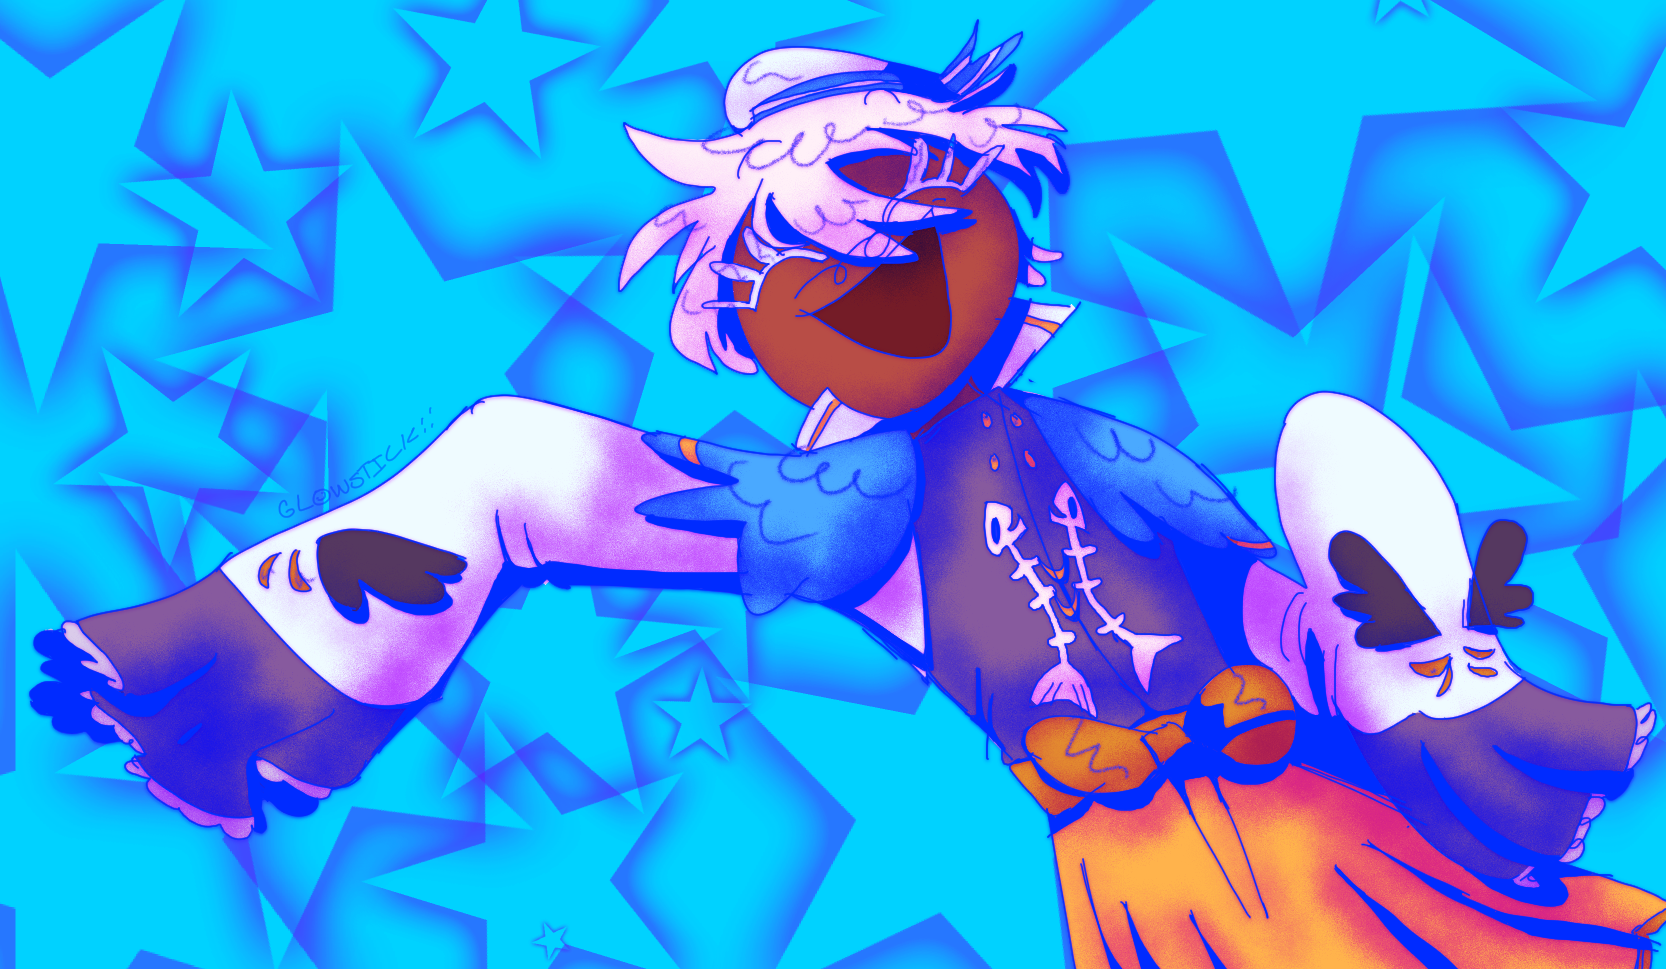 A digital drawing of Seagull Cookie, a Cookie Run oc with white hair and wearing a sailor outfit. They have one arm outstretched in a welcoming motion, and are visible from the waist-up.